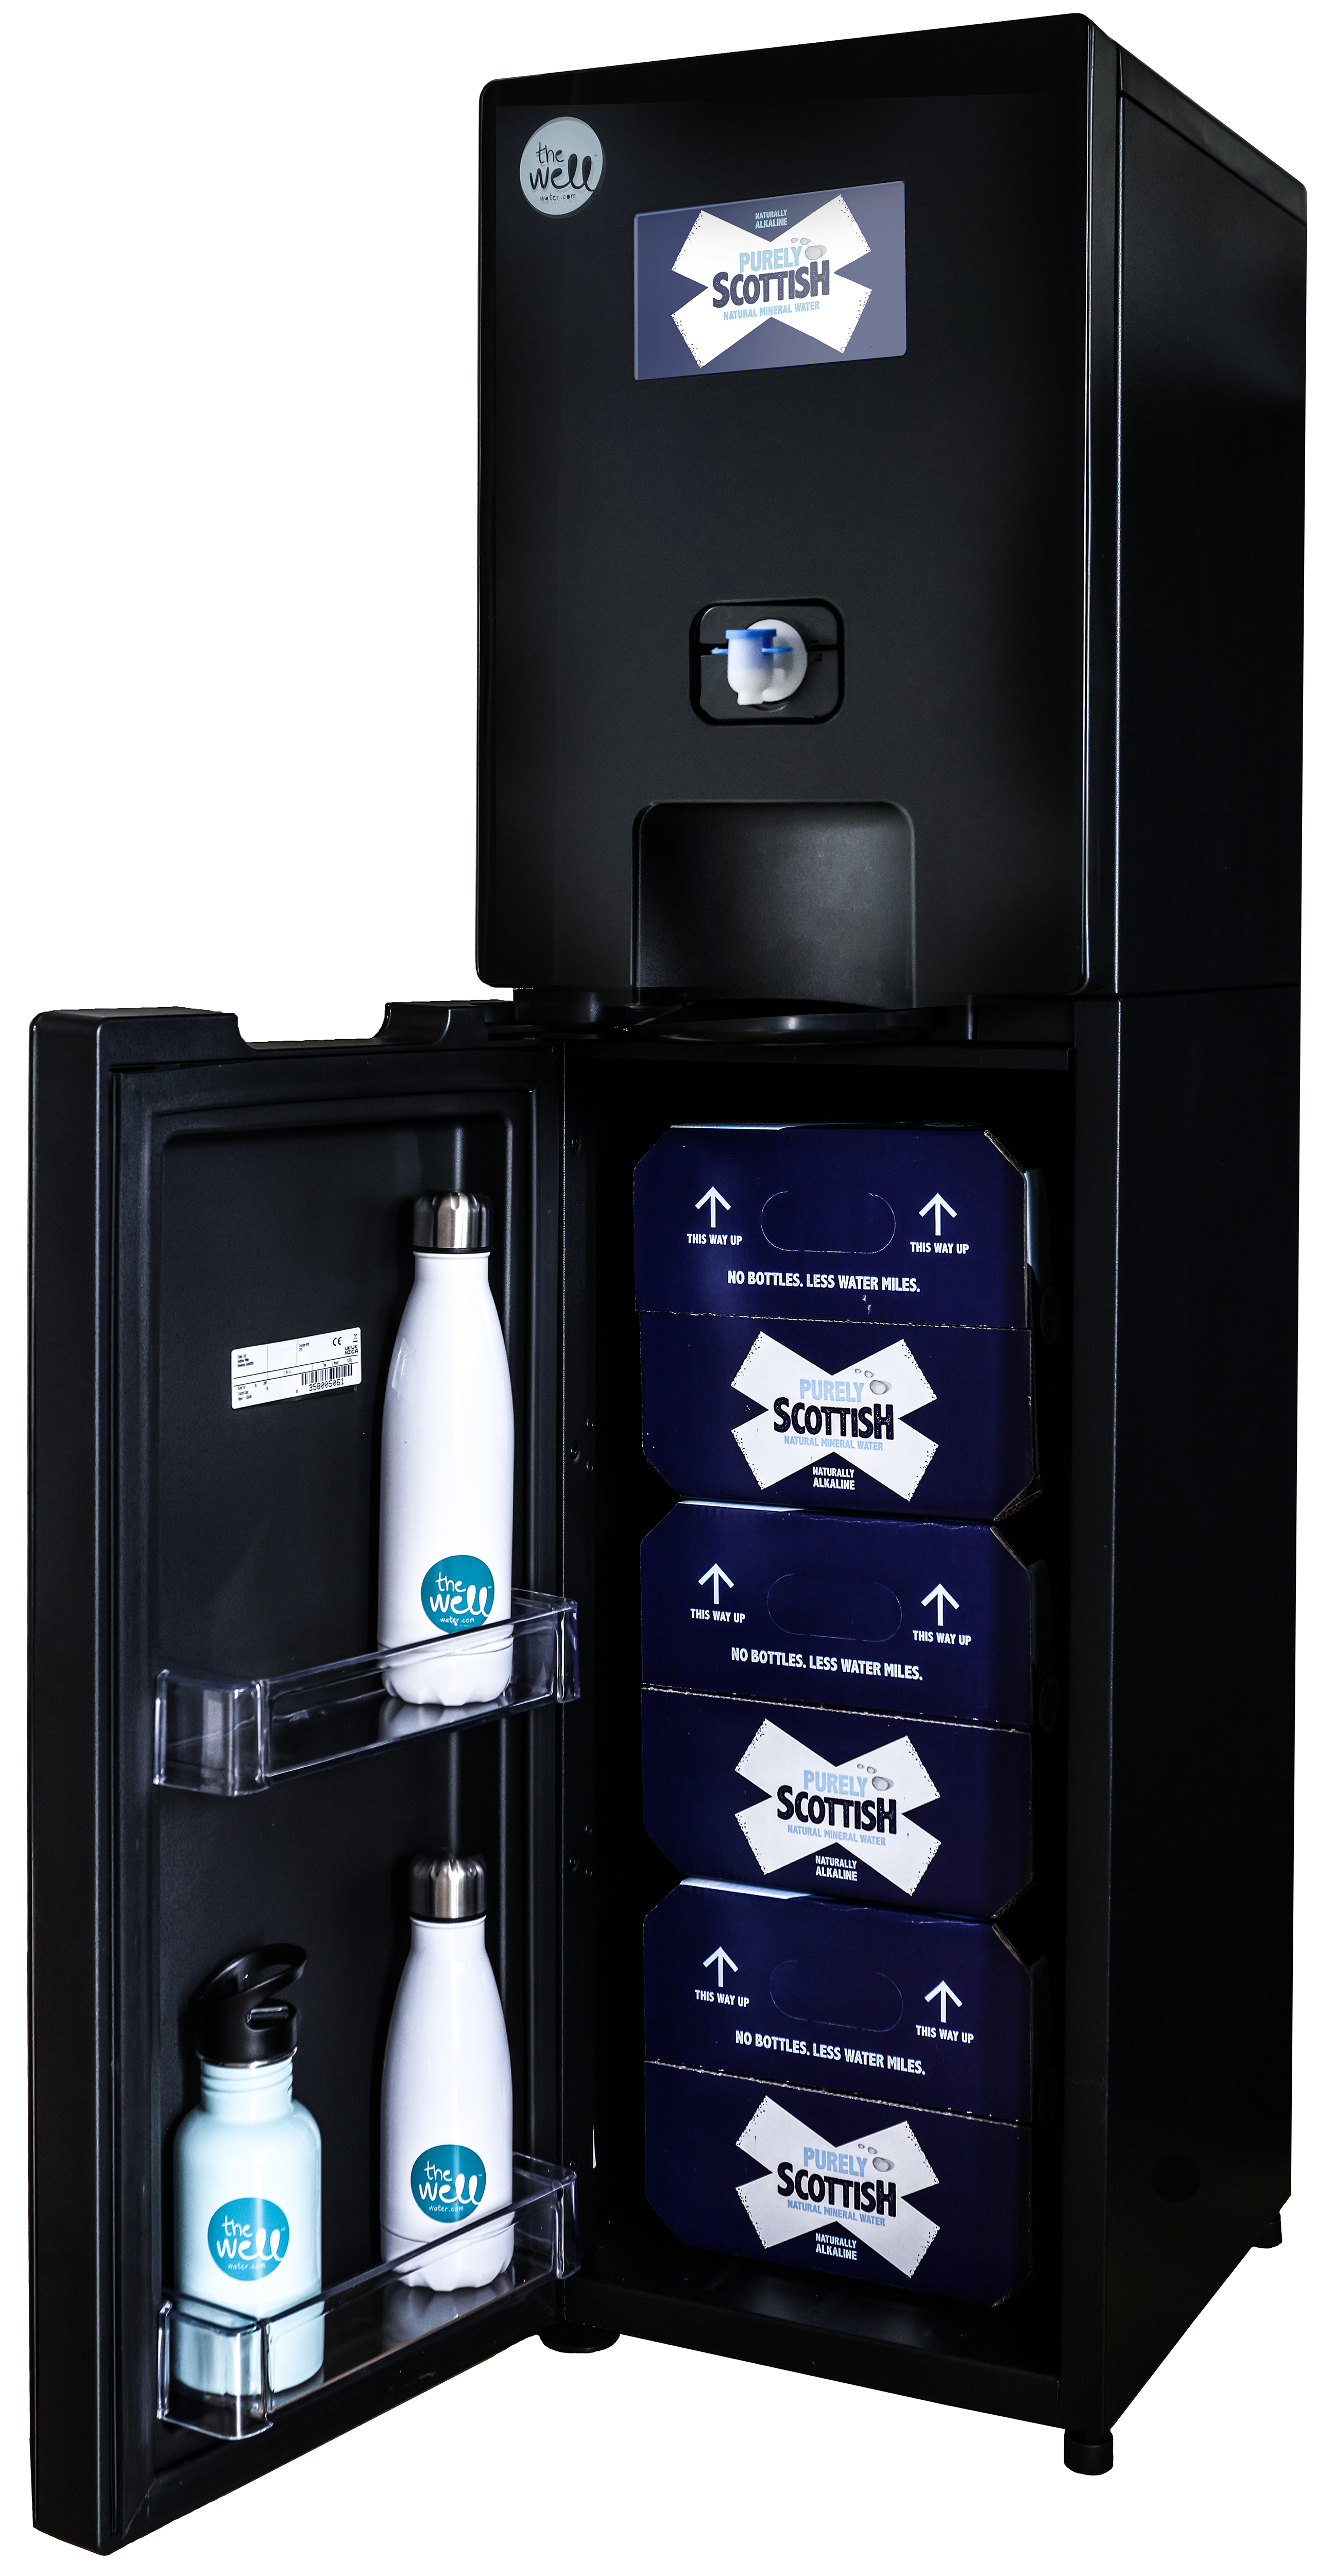 January 2022 – New boxed water dispenser.